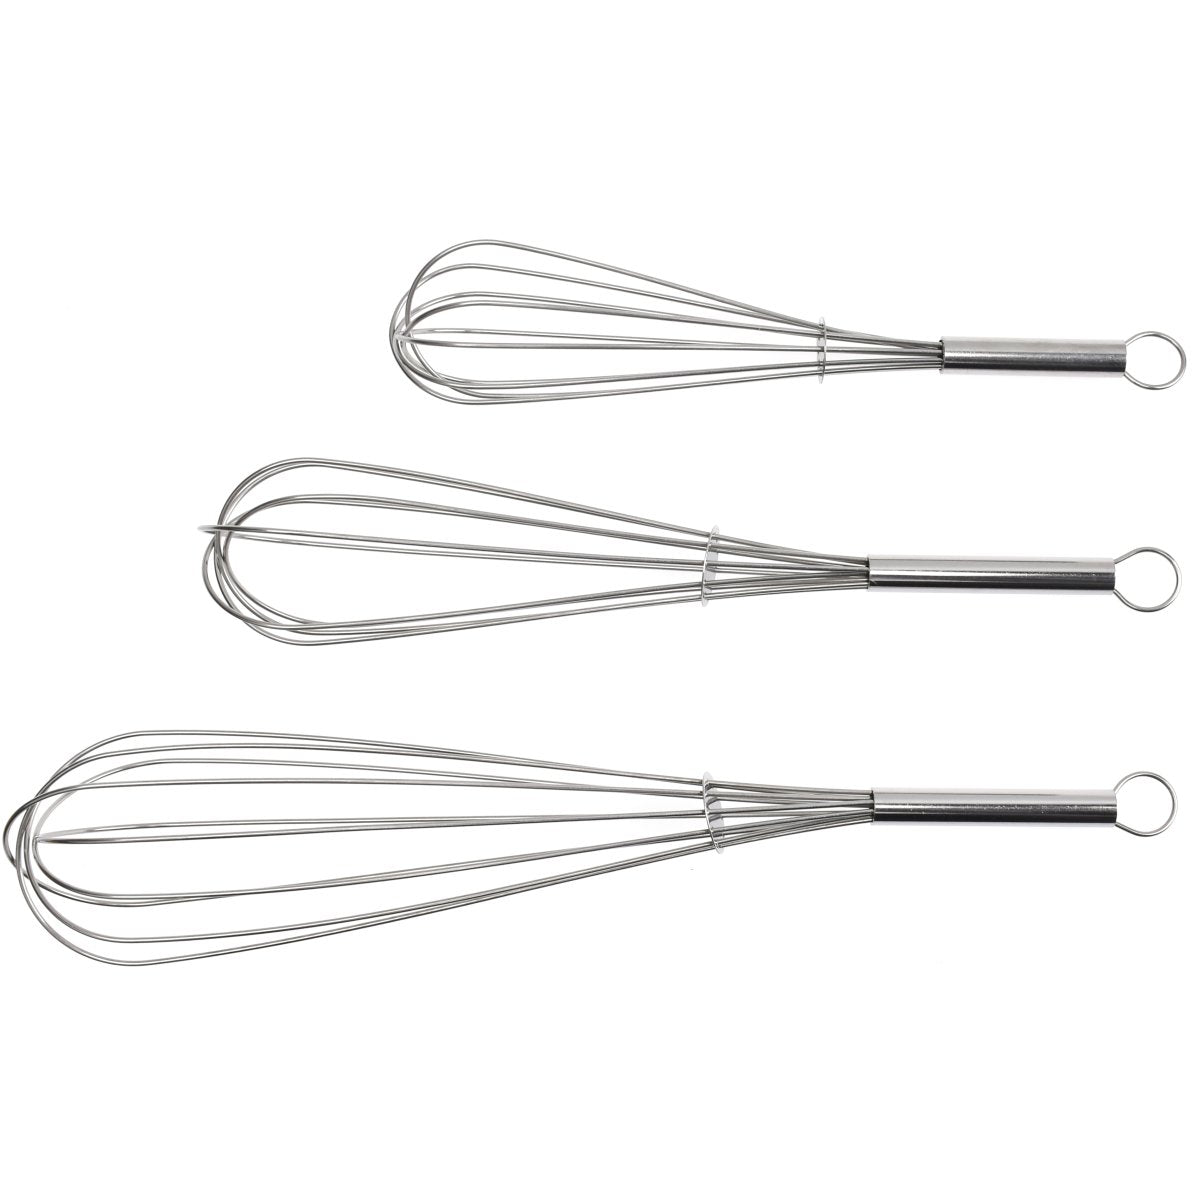 3 Piece Whisk Set Stainless Steel Rental